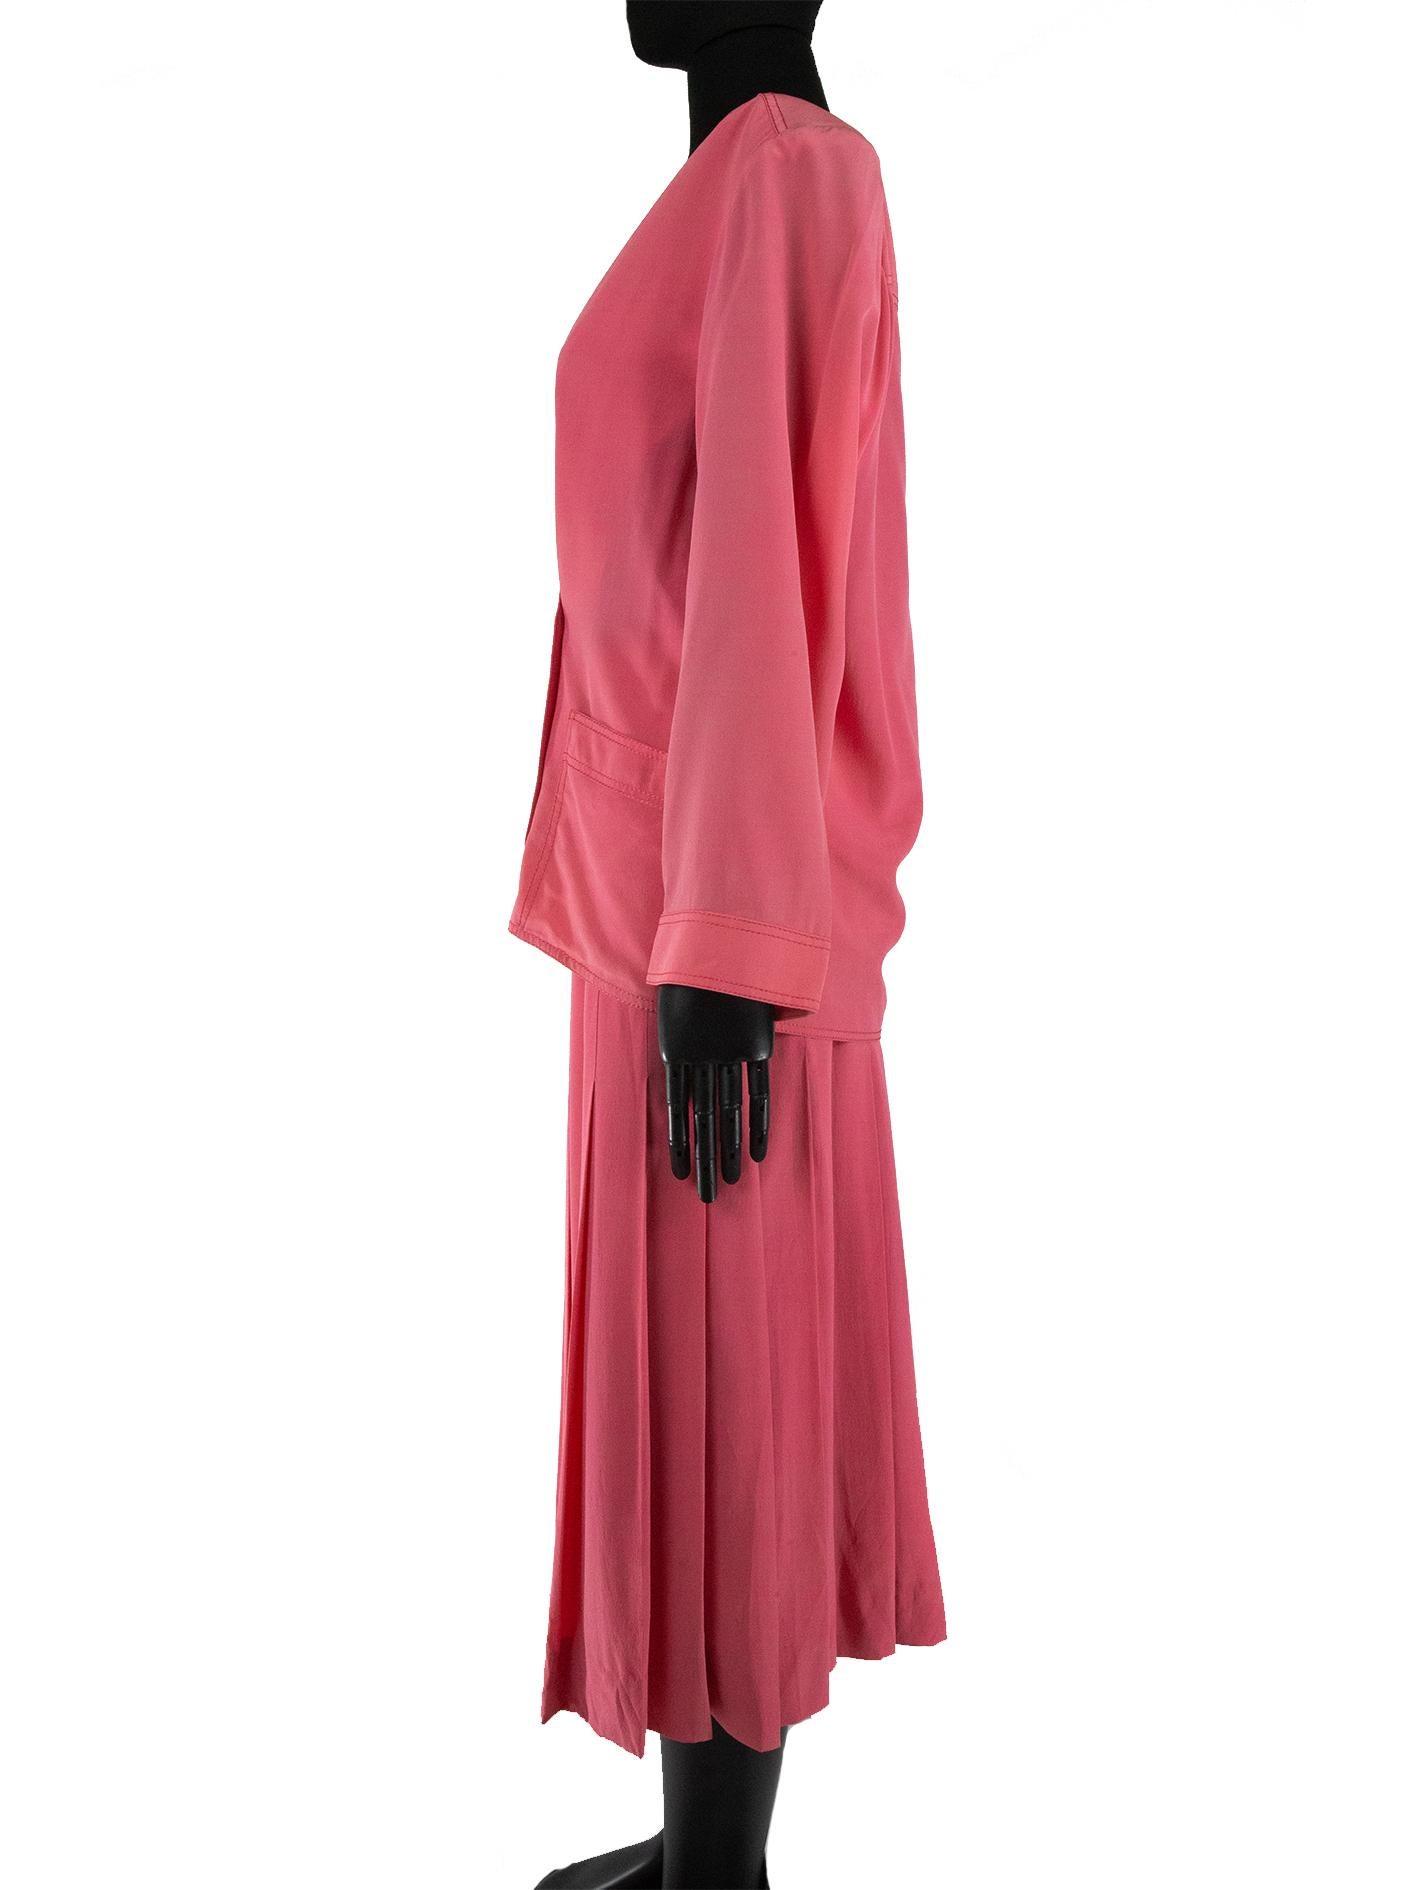 A Chanel two-piece silk crêpe suit from the 1980s, consisting of a loose-fitting, lightweight shirt and skirt. The shirt has a deep v neckline and is crossed over and fastened with double-breasted buttons. It has shoulder pads for a structured